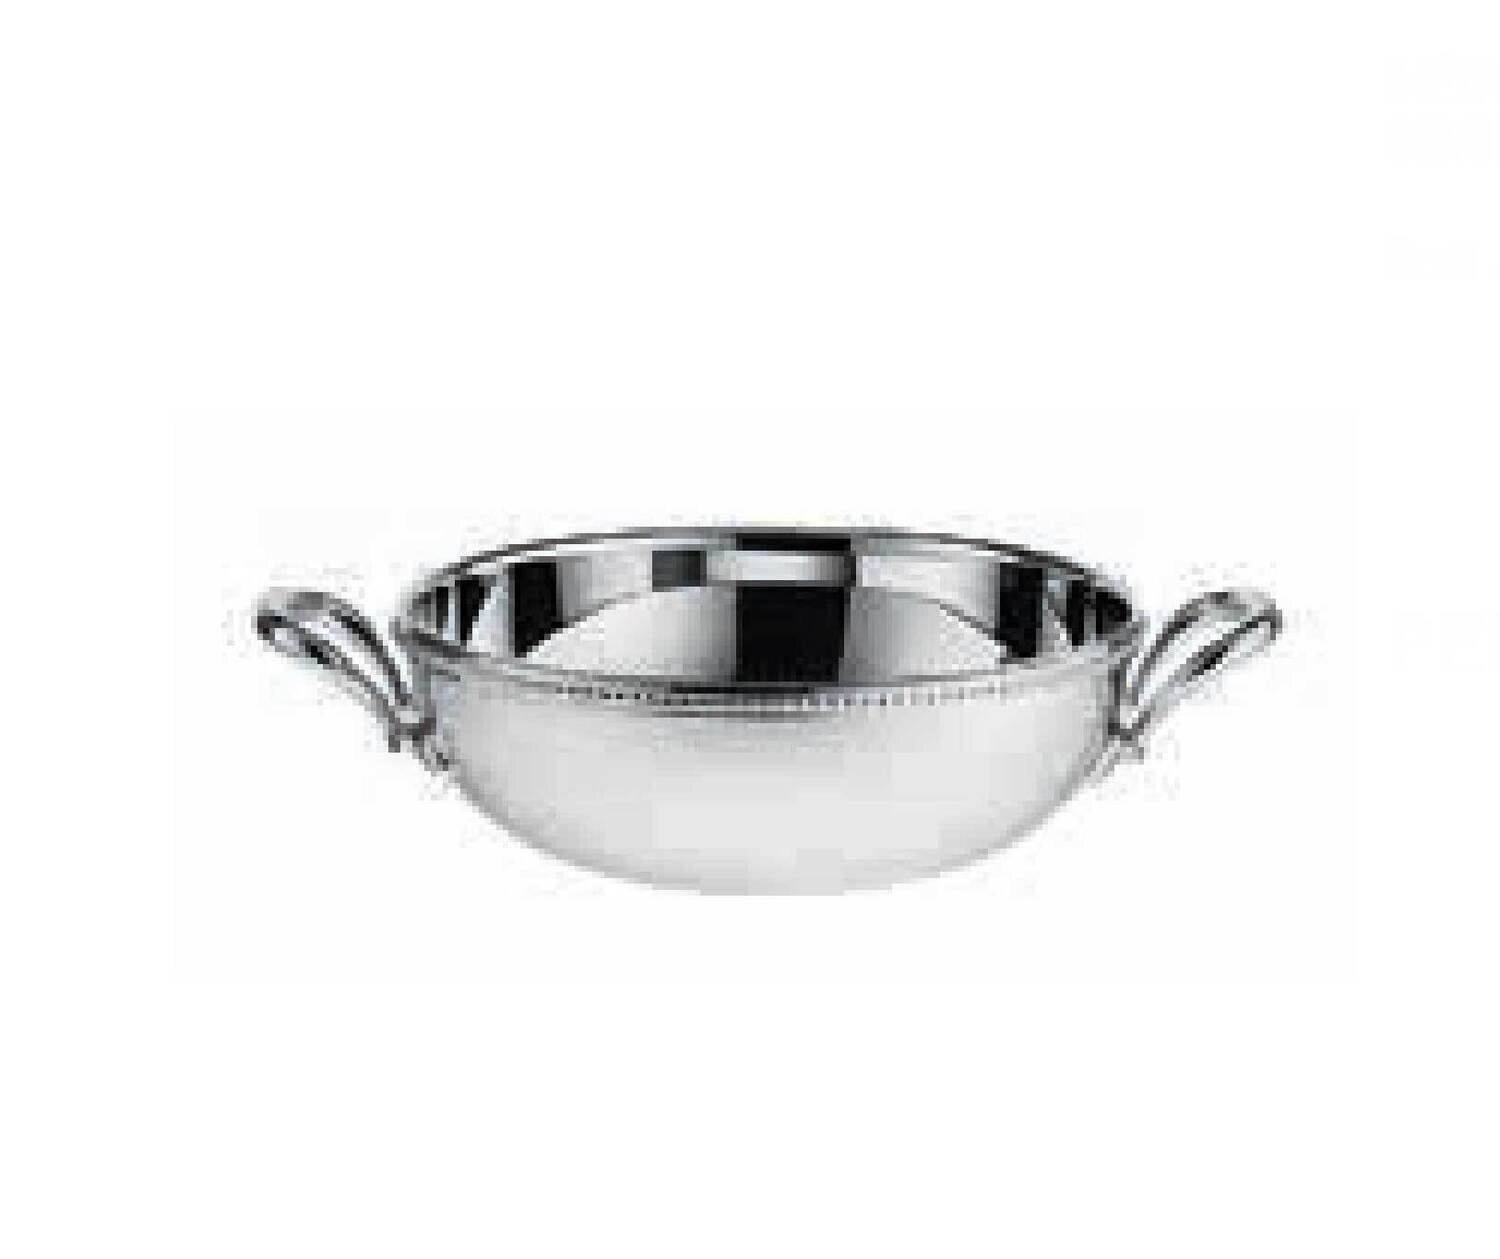 Ercuis Perles Vegetable Dish Without Cover 2.375 Inch Silver Plated F51P206-18